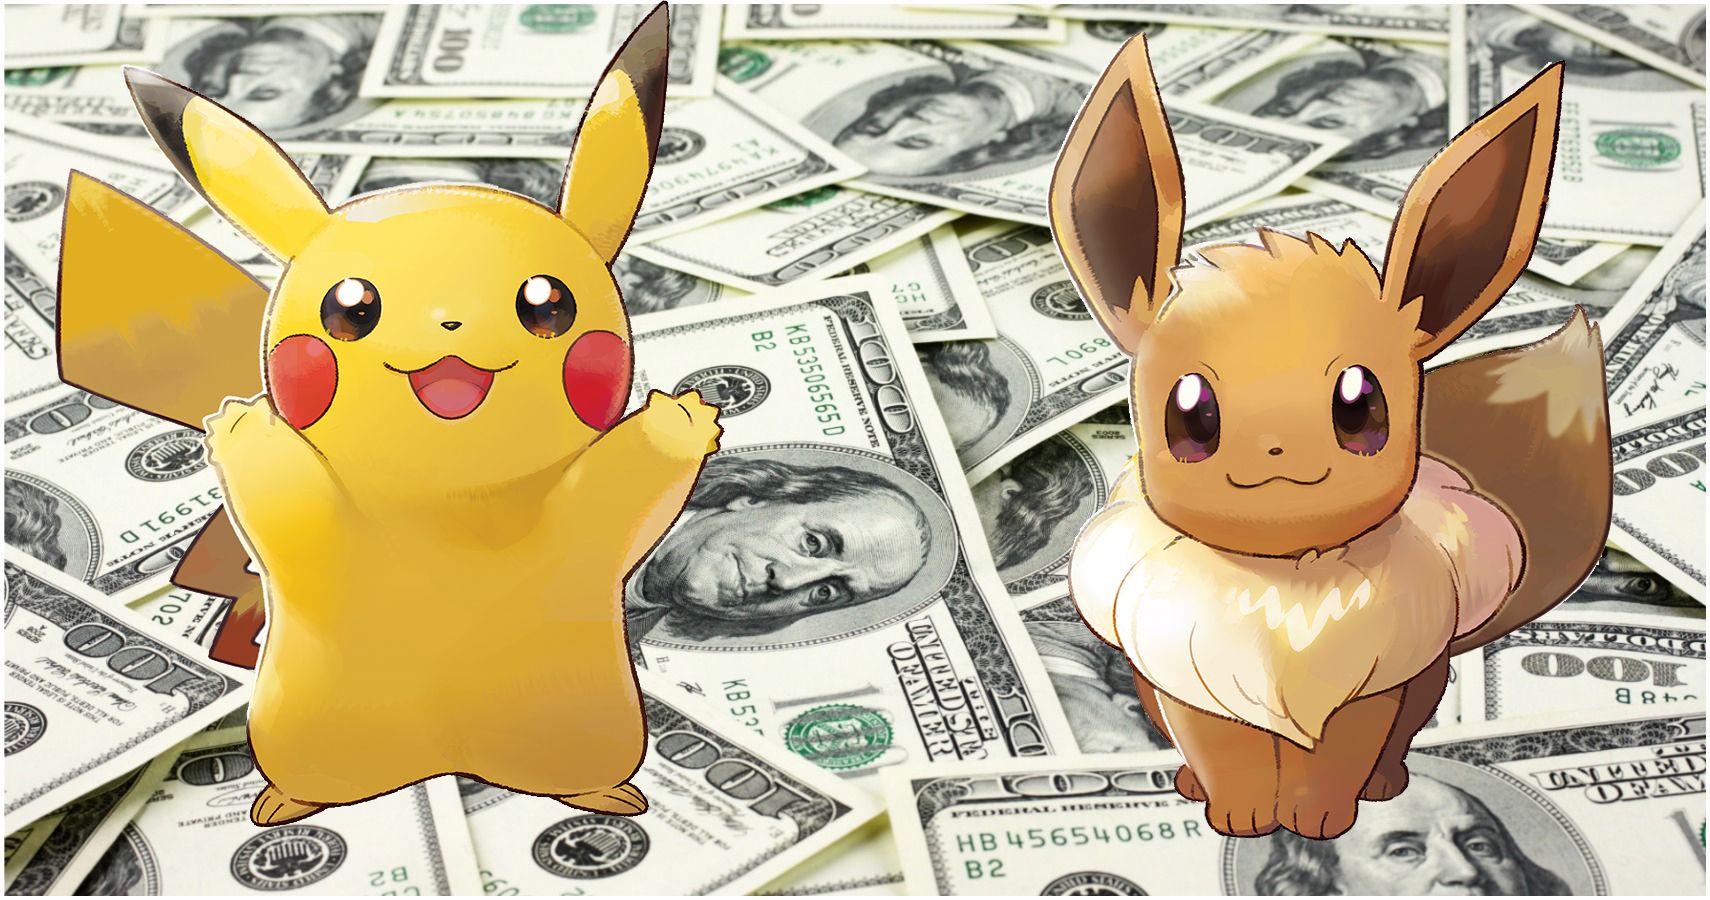 Pokémon Lets Go Pikachu And Eevee Sell Three Million In First Week  The Best For Any Switch Game Yet